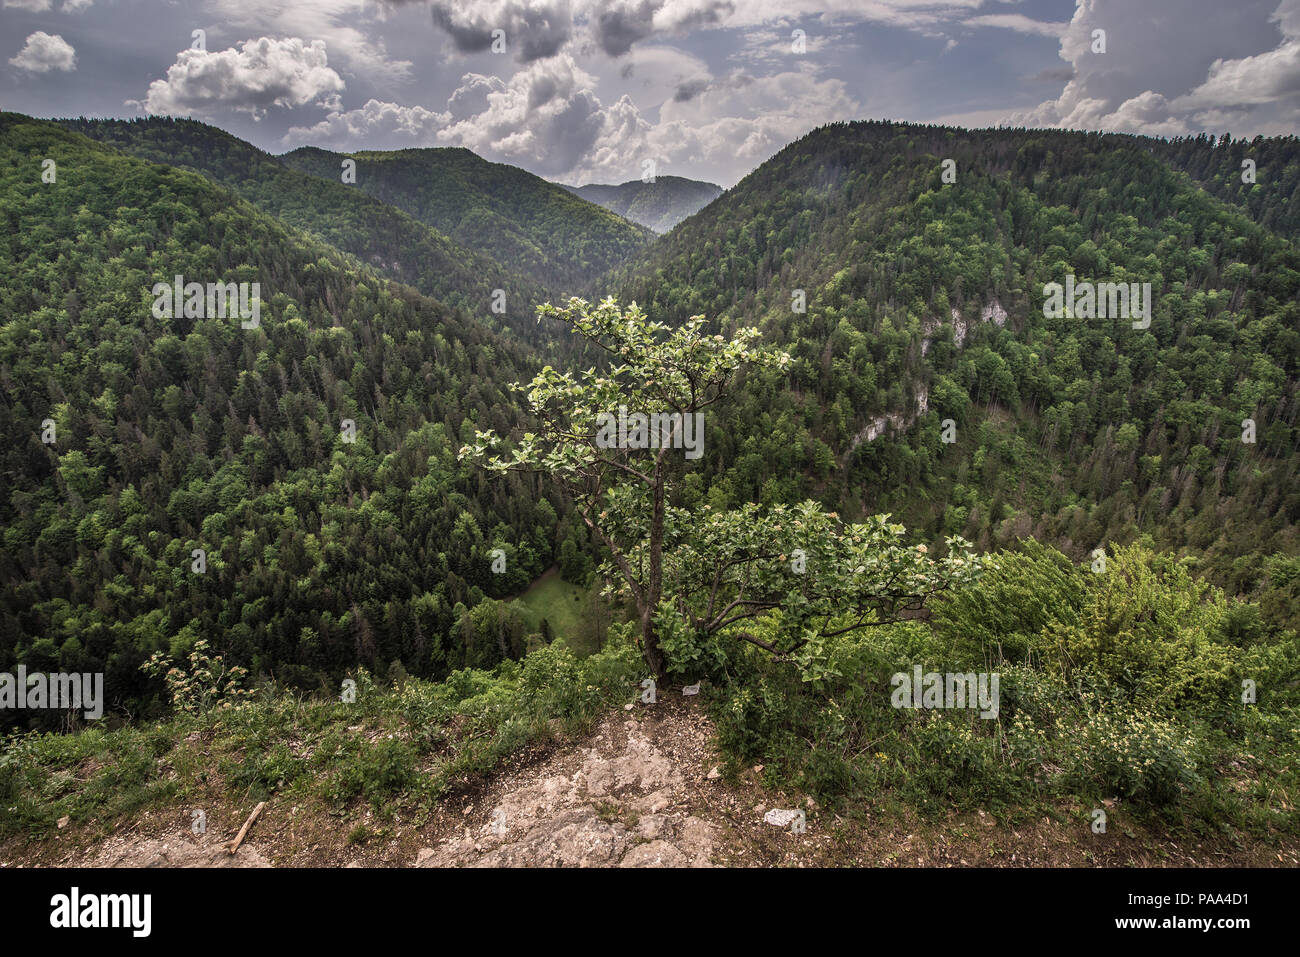 View from Tomasovsky Vyhlad viewing point on the left side of the Hornad River valley in Slovak Paradise National Park, Slovakia Stock Photo